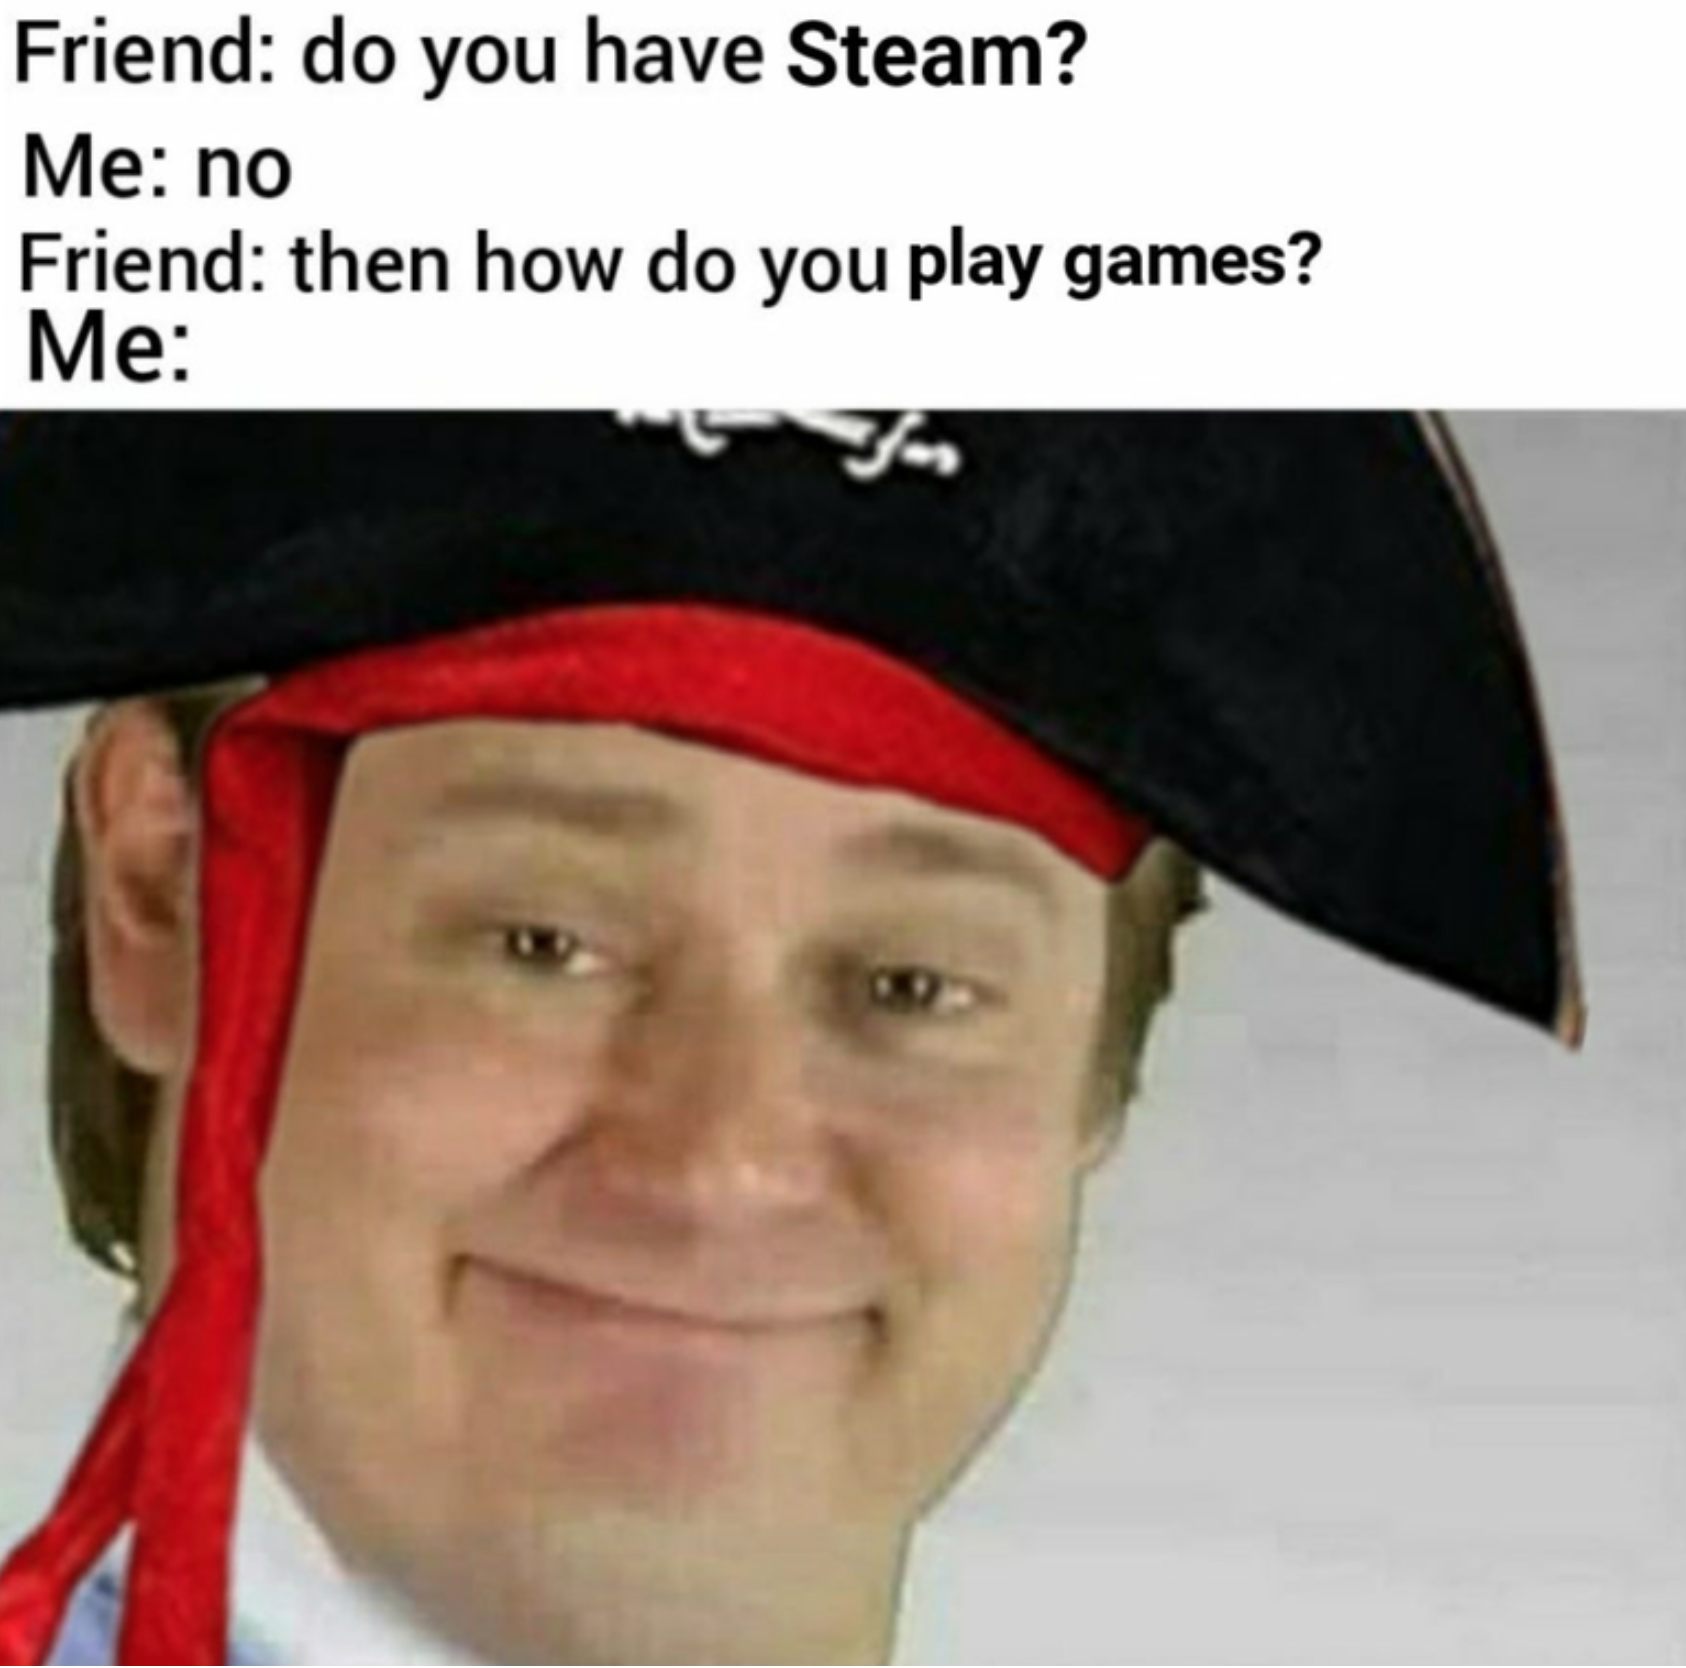 free real estate meme - Friend do you have Steam? Me no Friend then how do you play games? Me